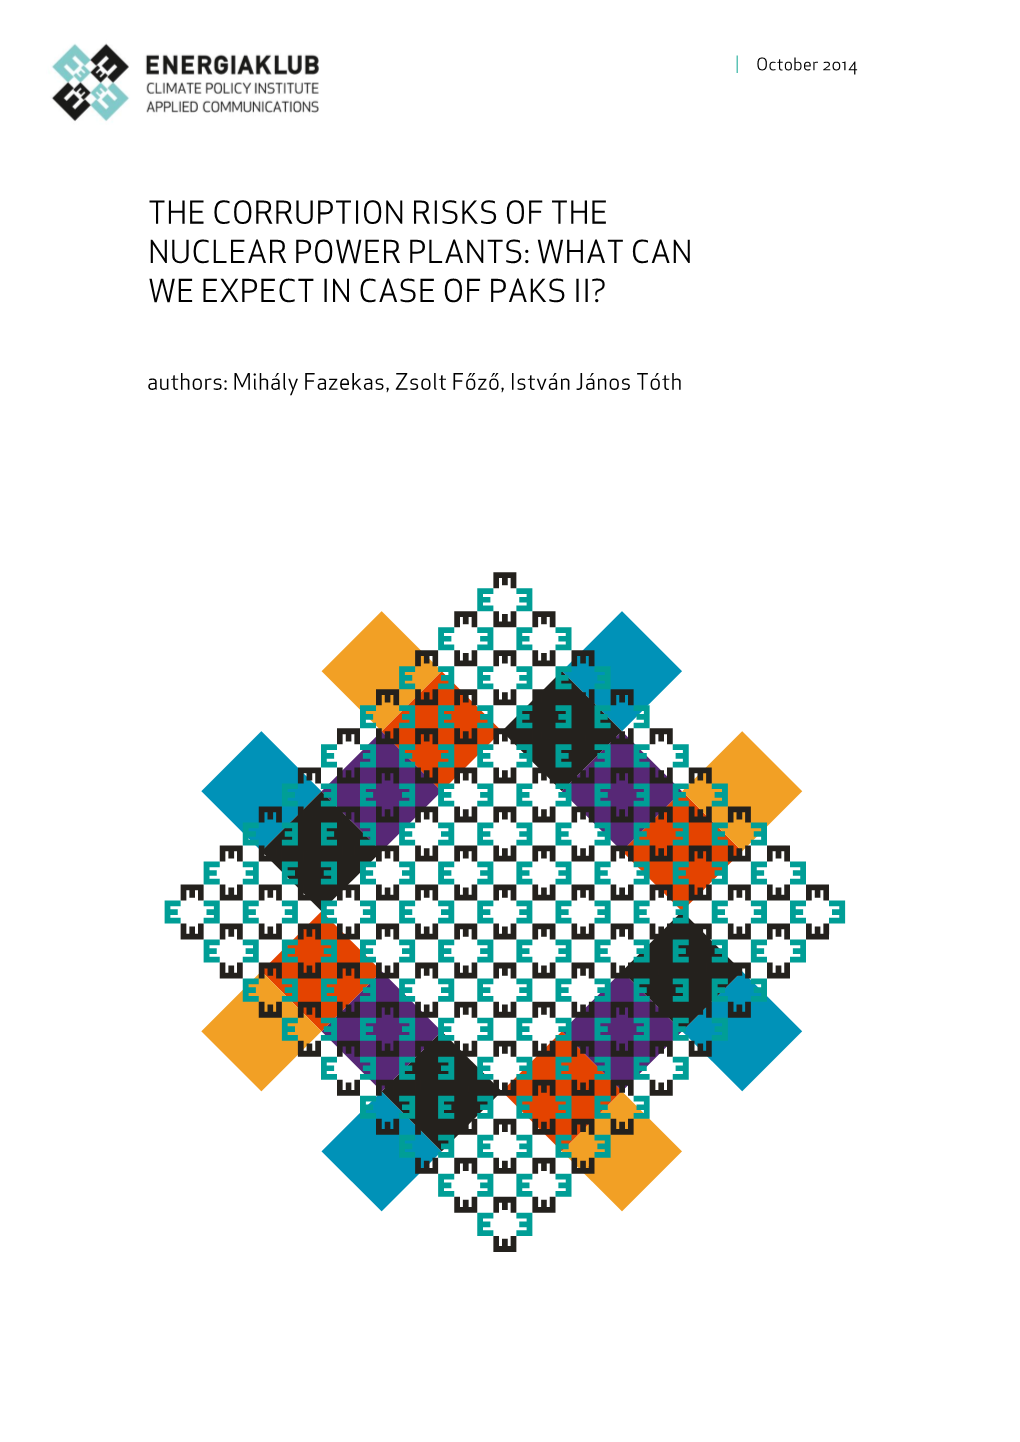 The Corruption Risks of the Nuclear Power Plants: What Can We Expect in Case of Paks Ii?